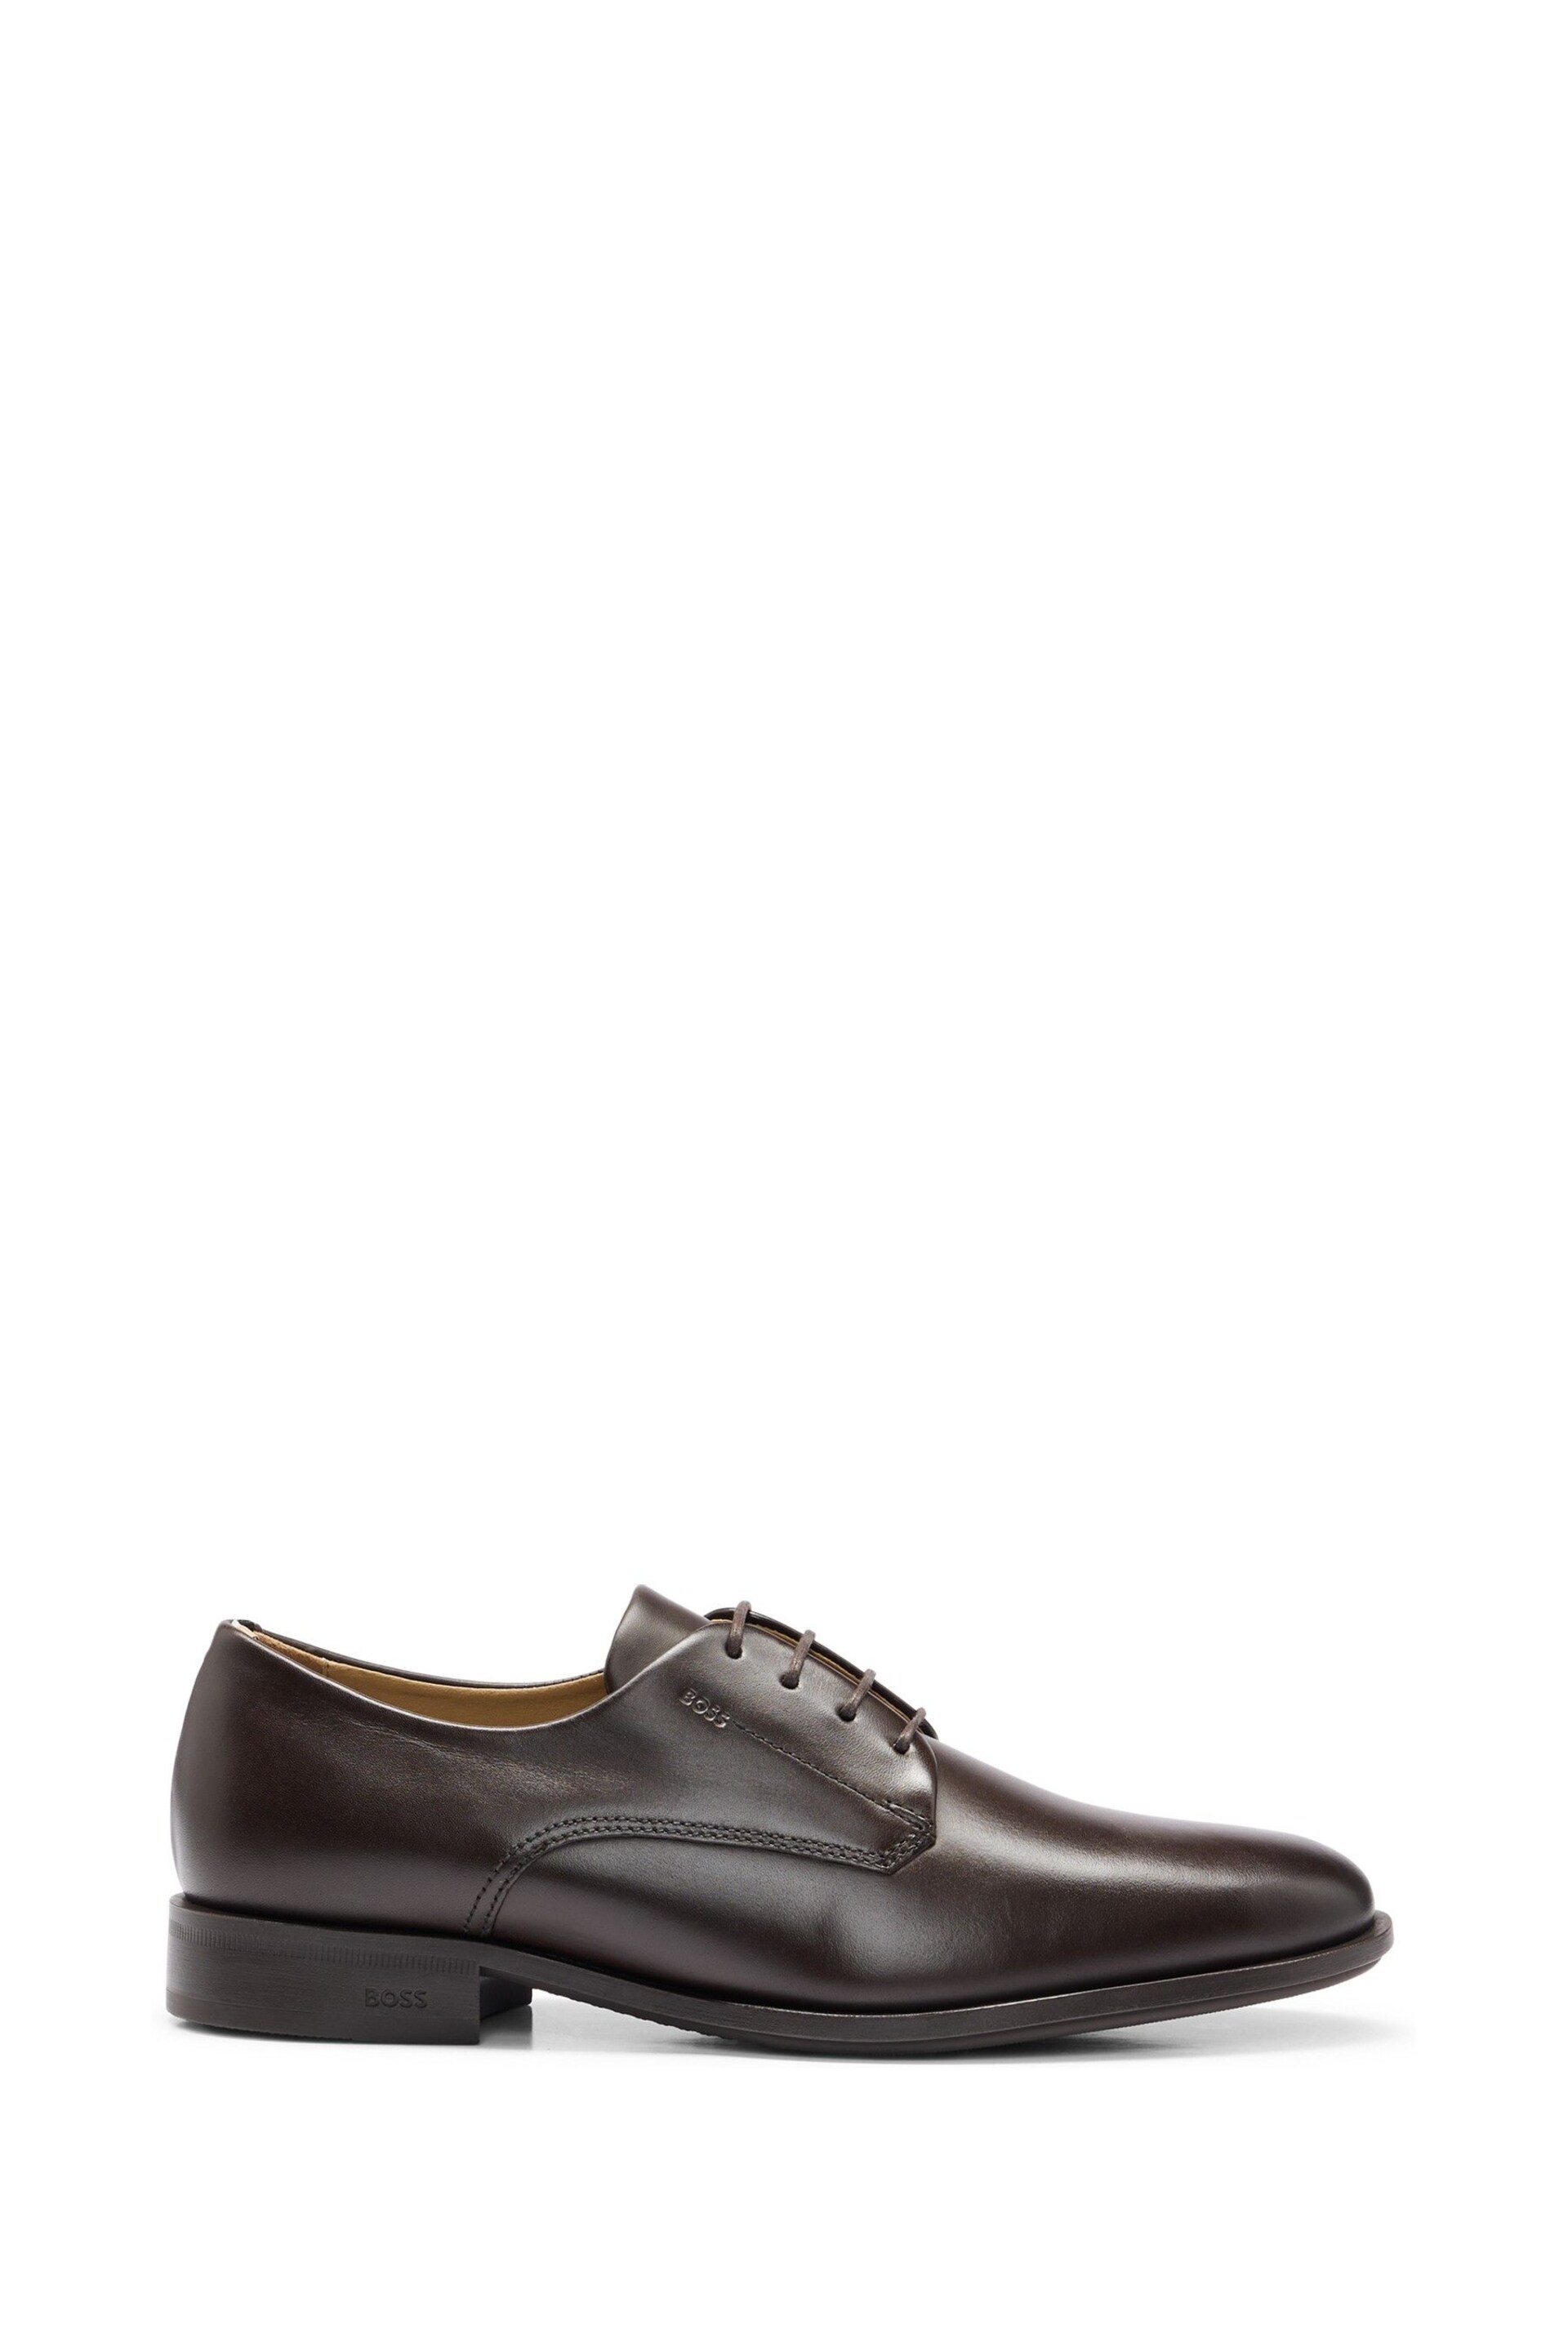 BOSS Brown Colby Leather Derby Shoes - Image 1 of 3